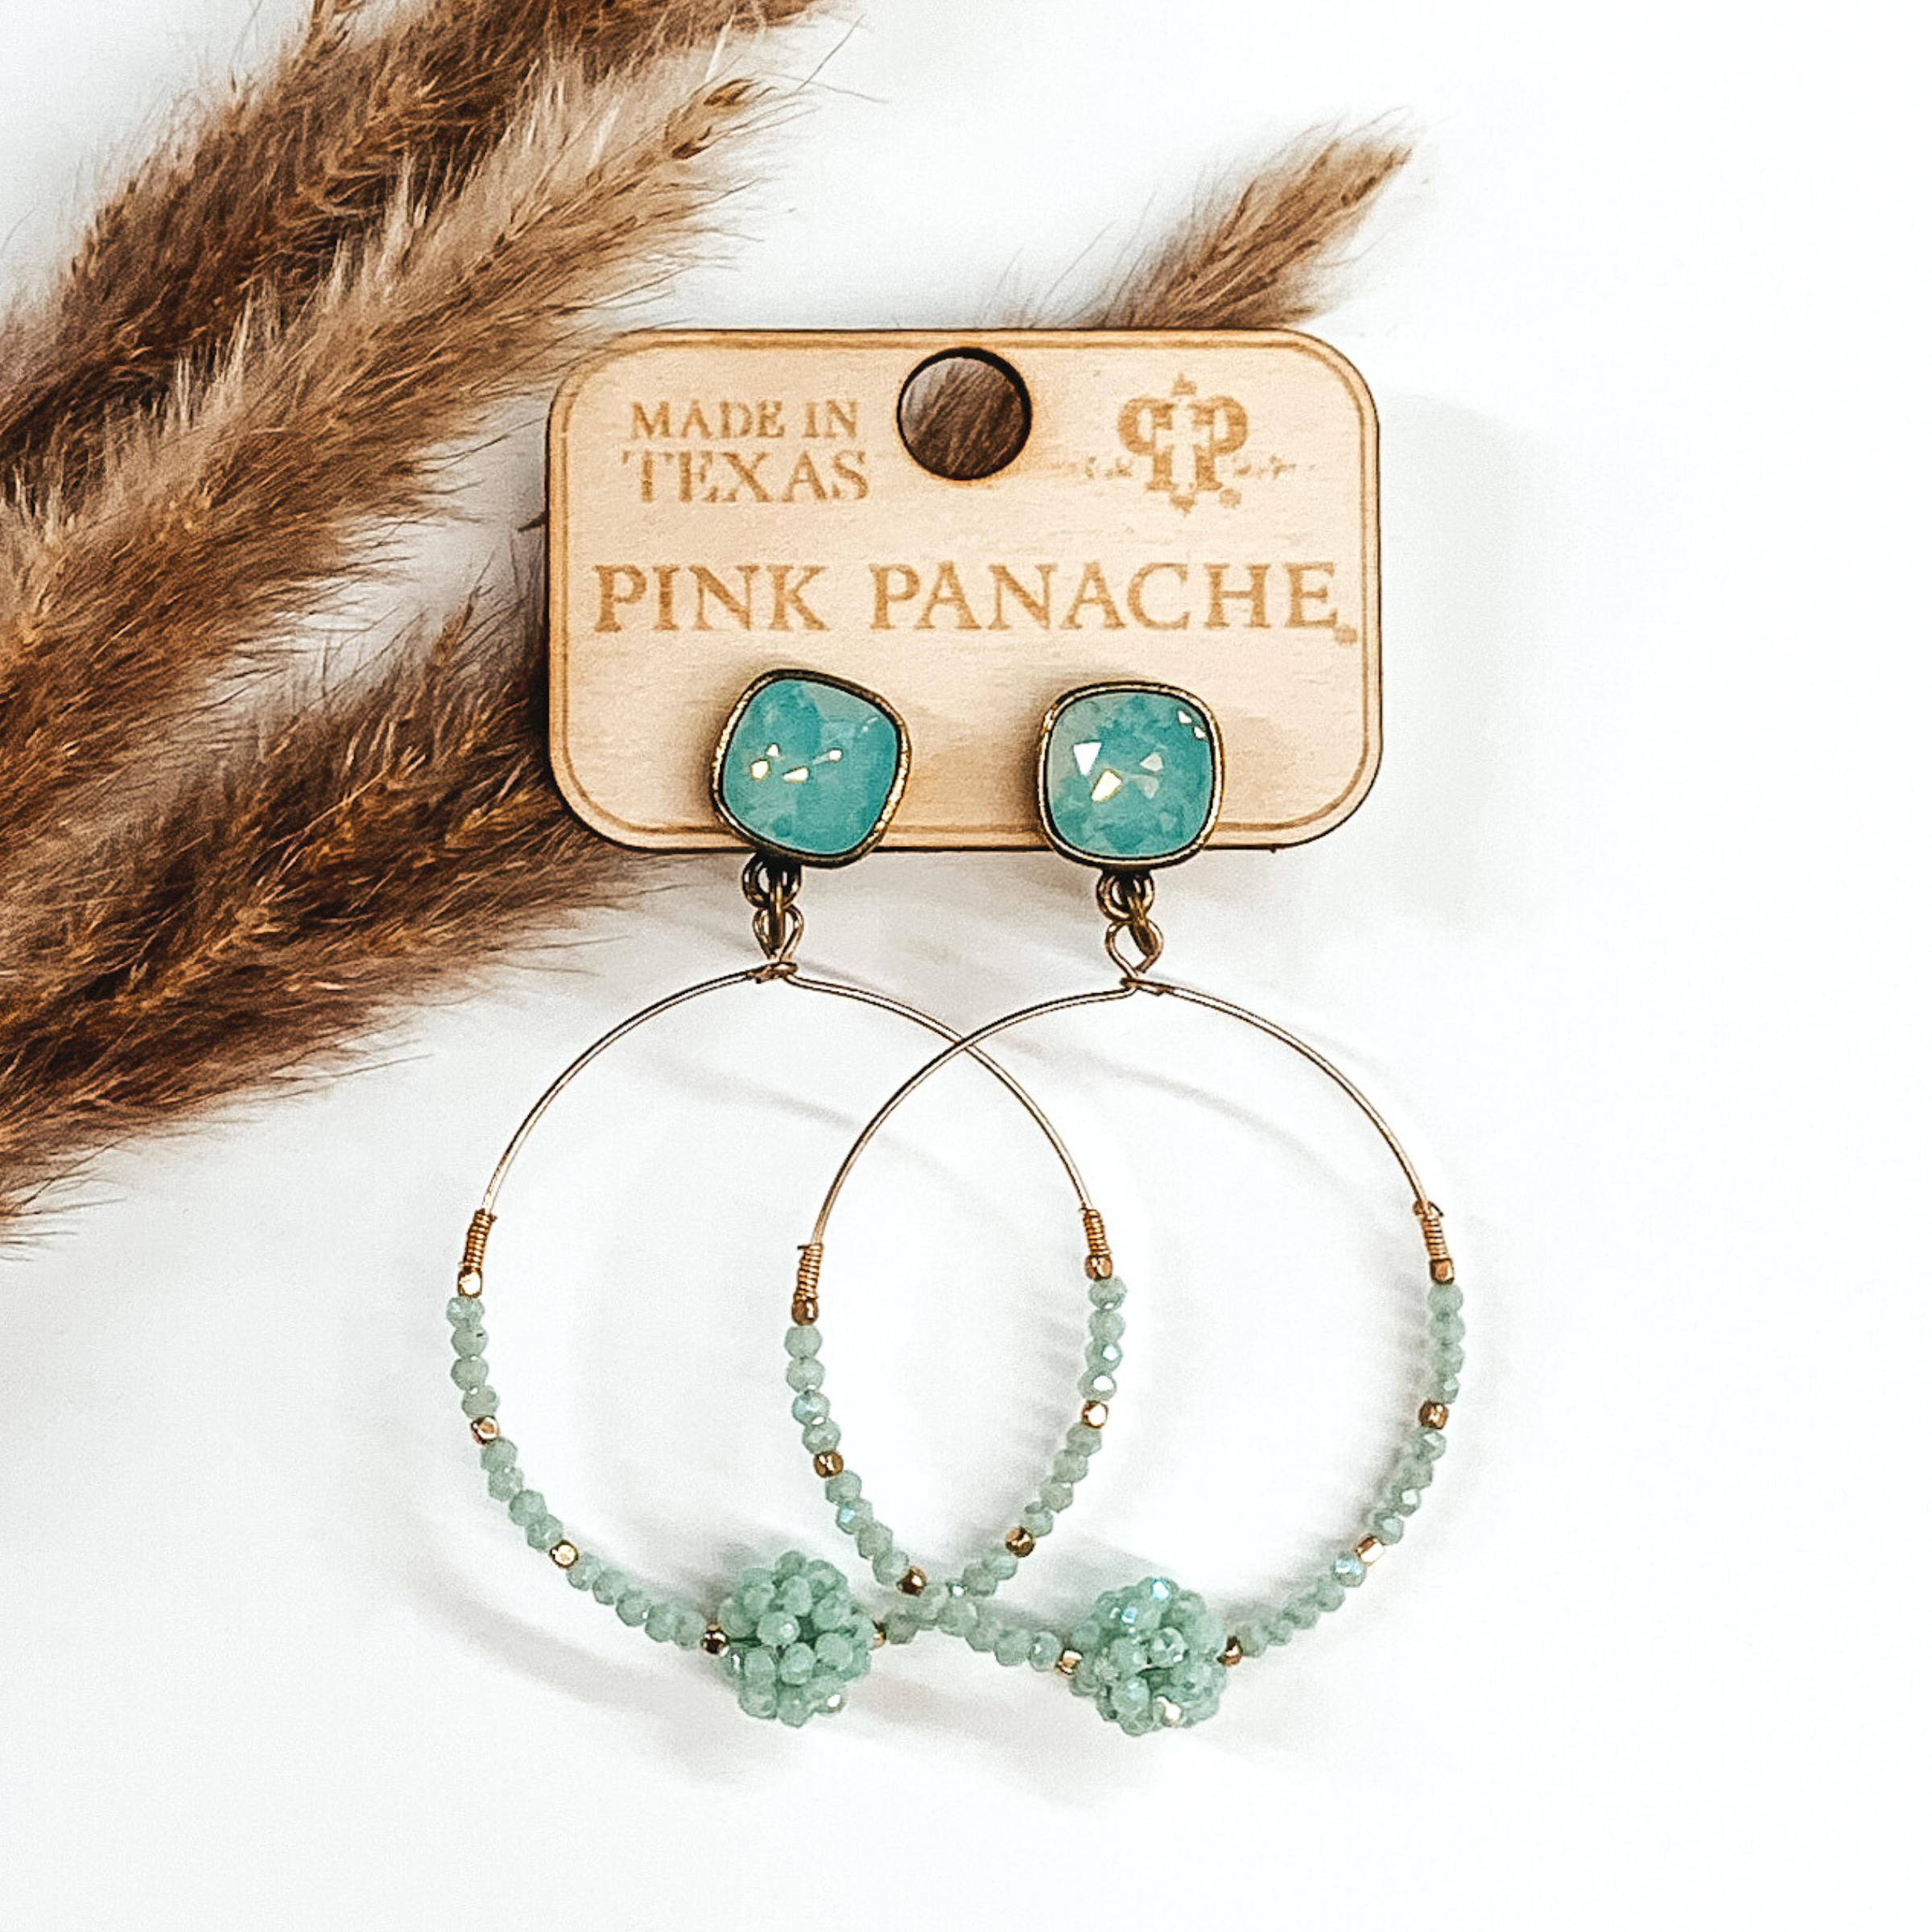 Pink Panache | Mint and Gold Beaded Knot Hoop Earrings with Cushion Cut Crystals in Mint - Giddy Up Glamour Boutique